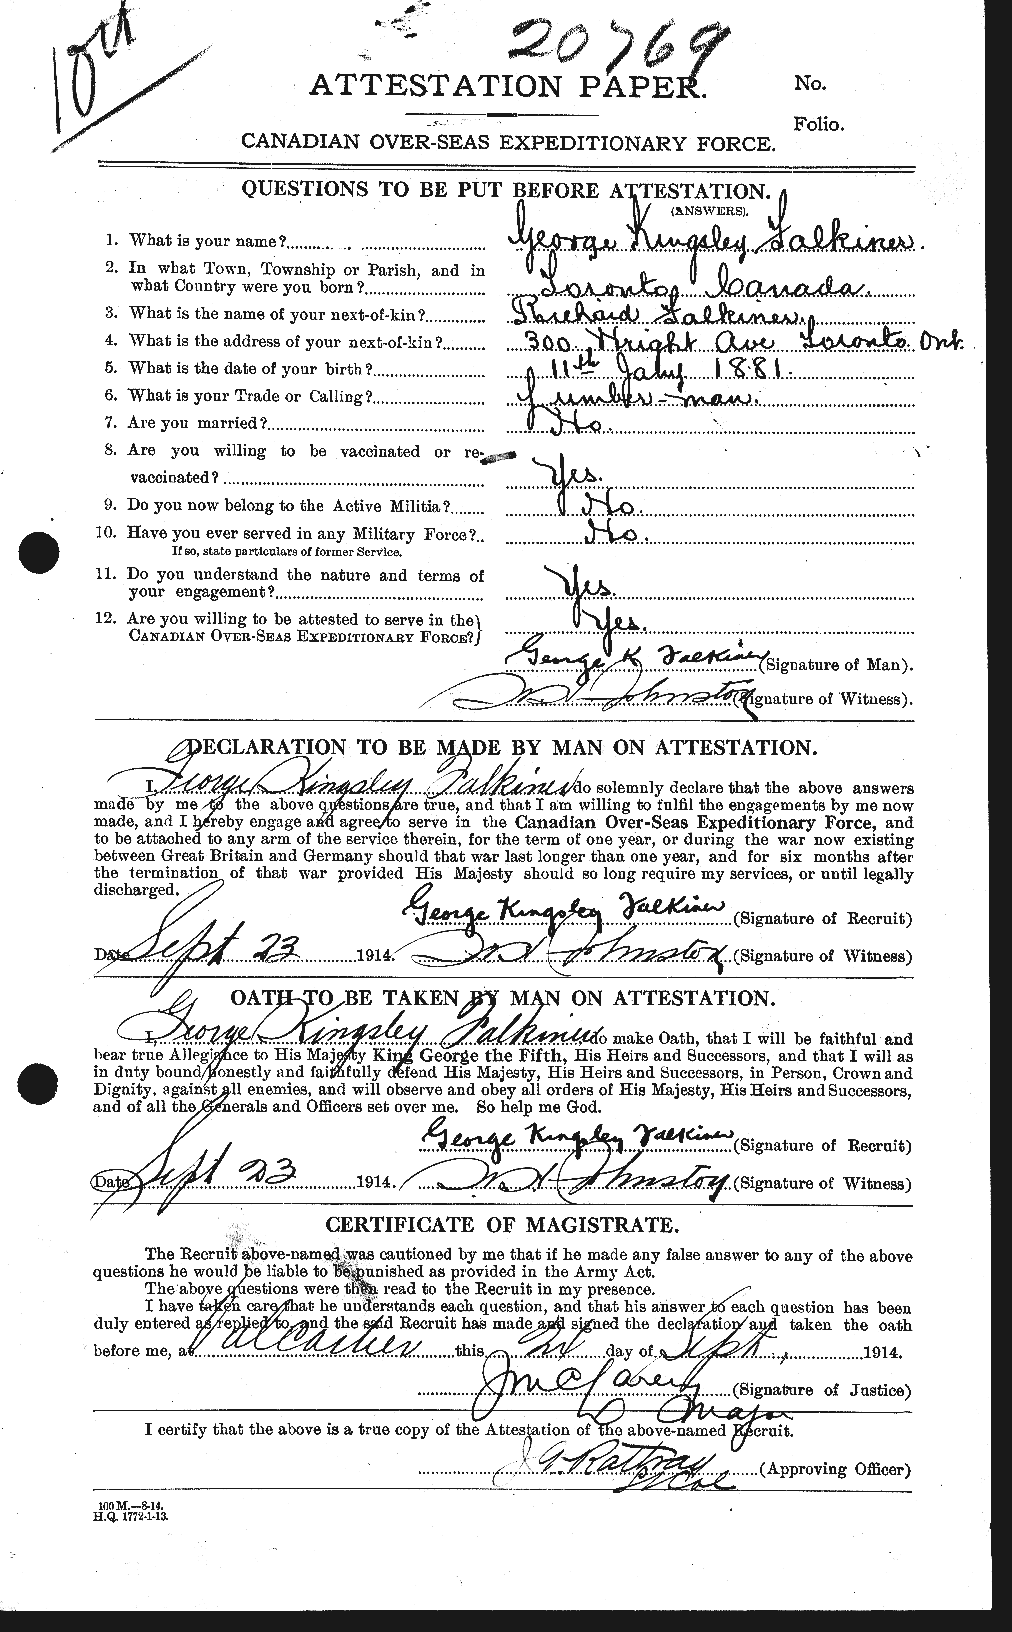 Personnel Records of the First World War - CEF 317054a